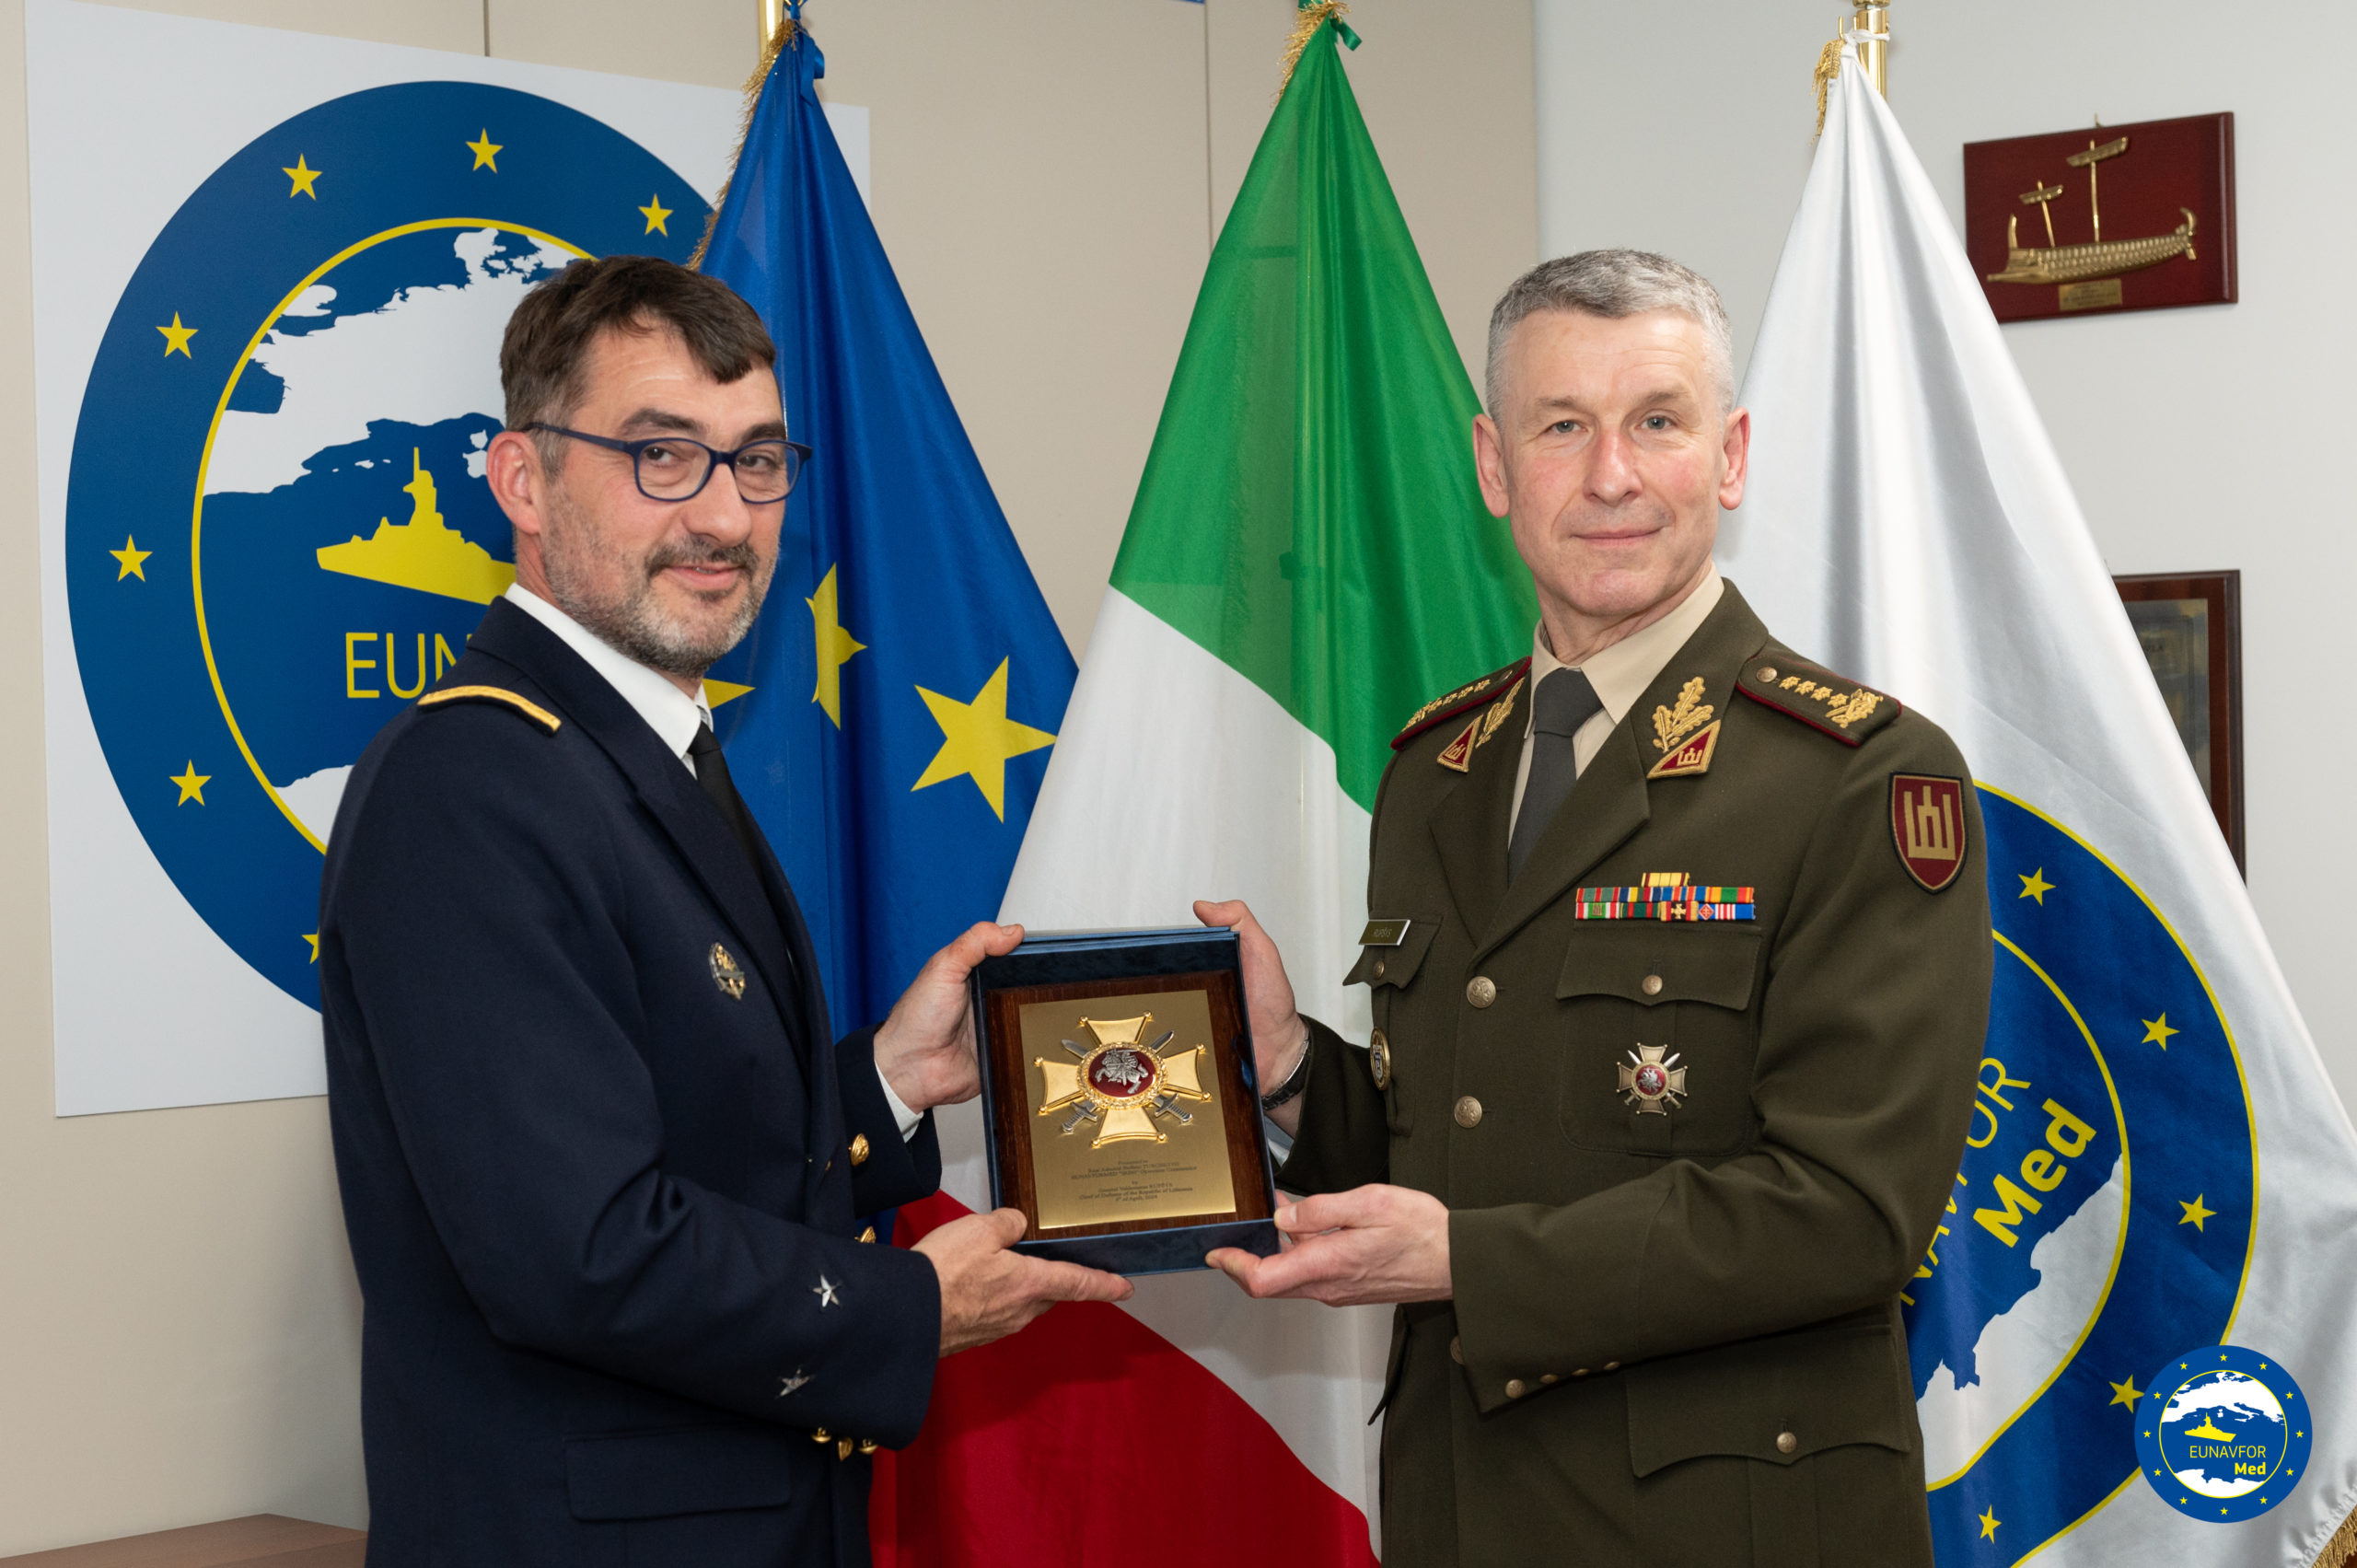 General Valdemaras Rupšys, Chief of Defence of the Republic of Lithuania, visited EUNAVFOR MED IRINI OHQ